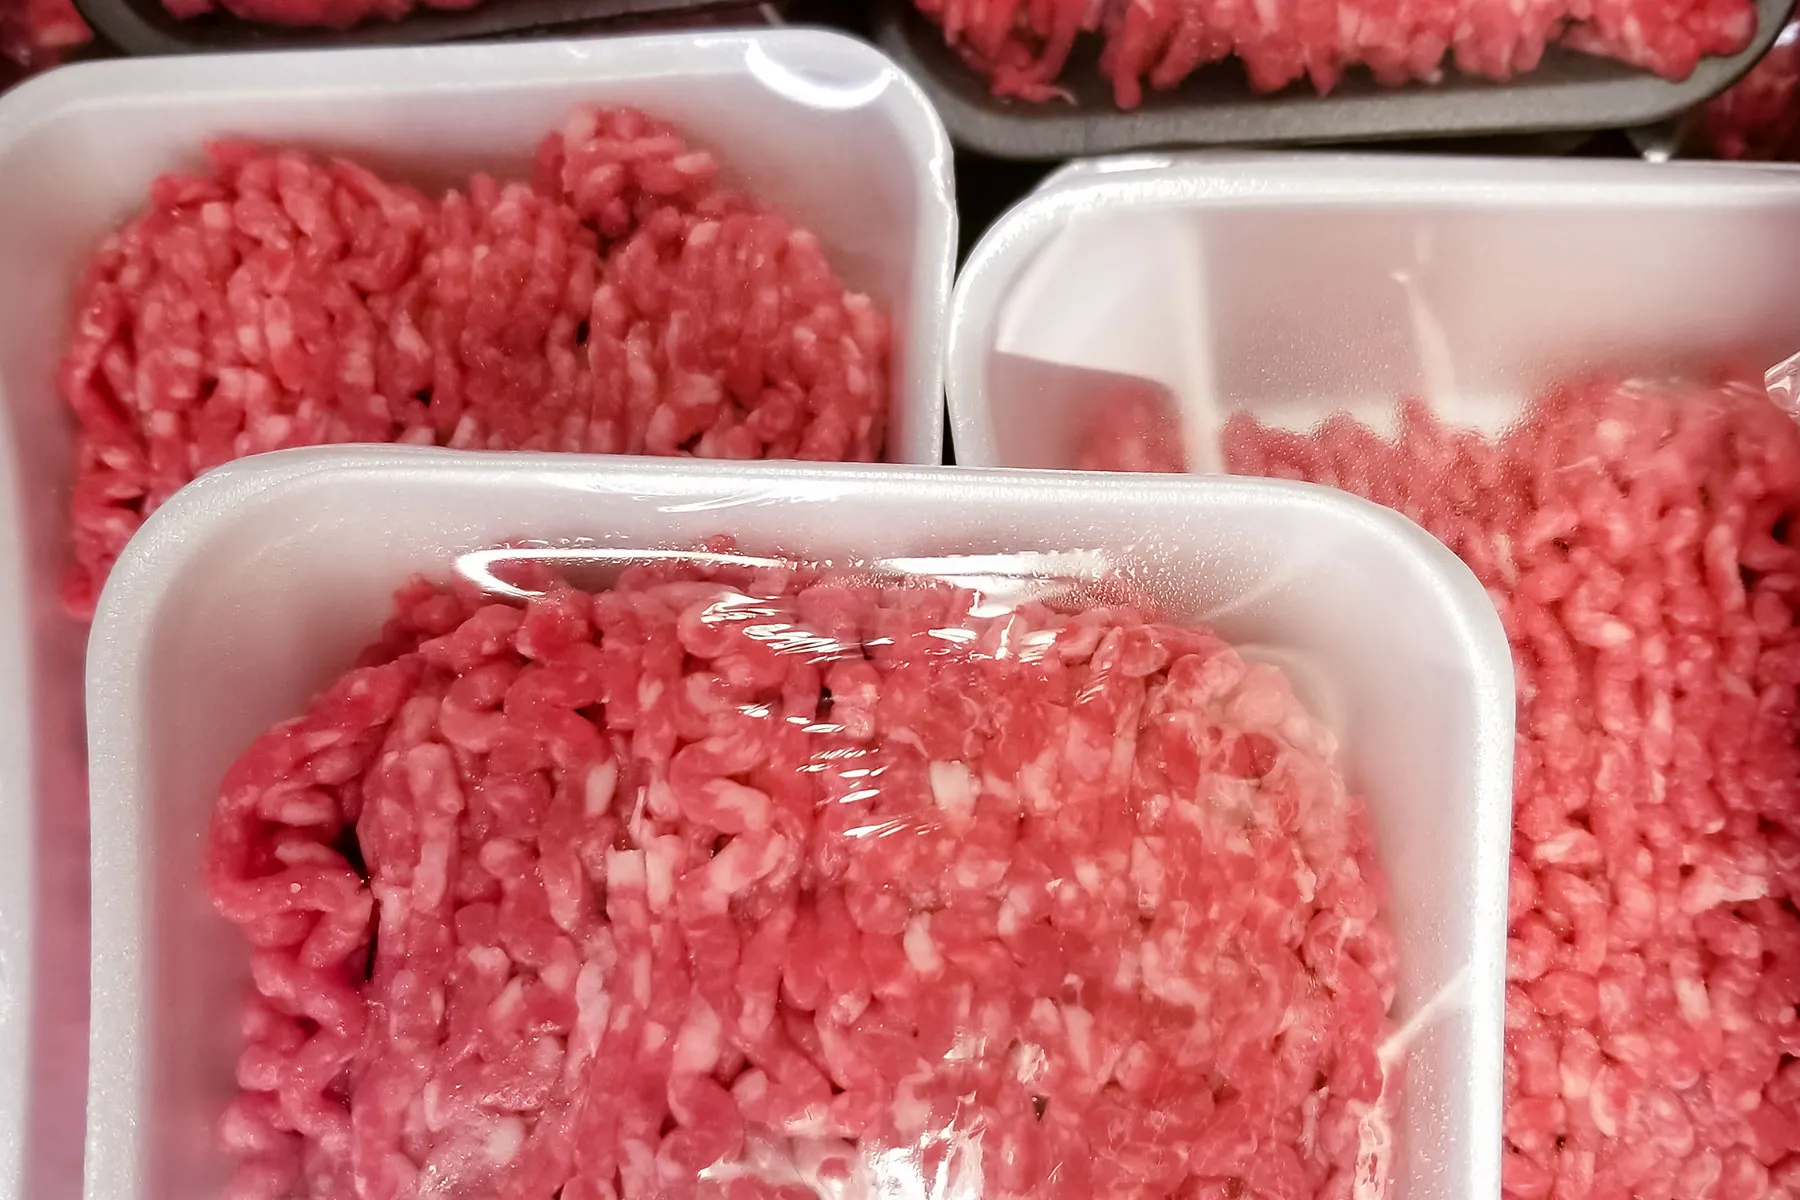 Meat Company Recalls 28,000 Pounds of Ground Beef